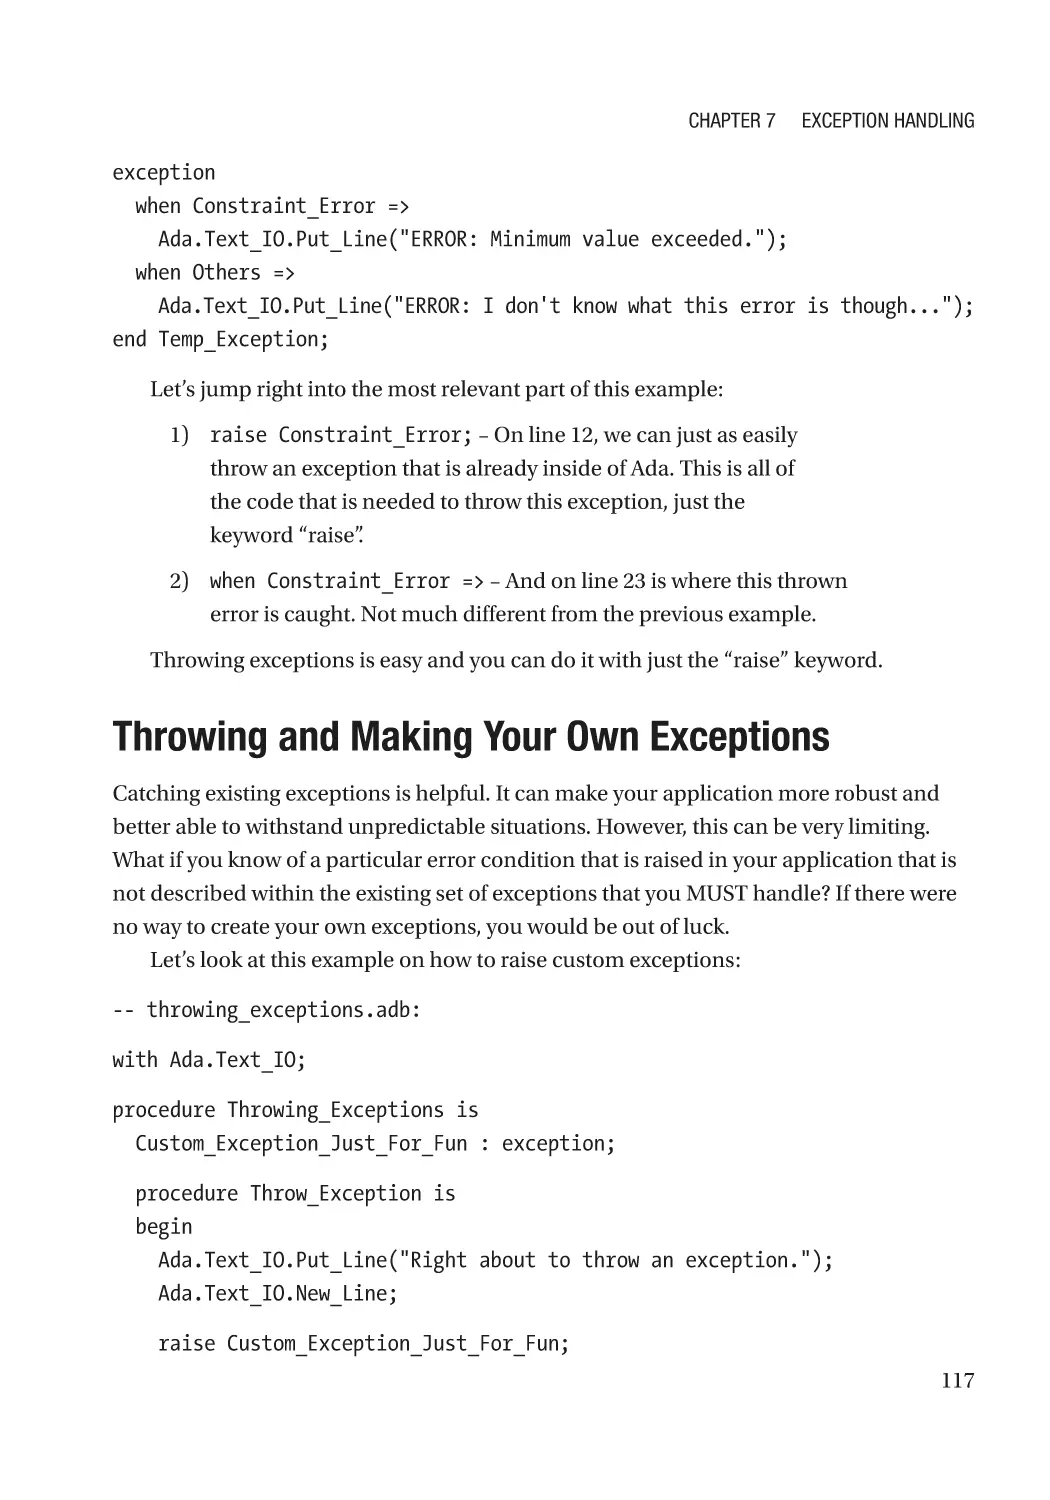 Throwing and Making Your Own Exceptions